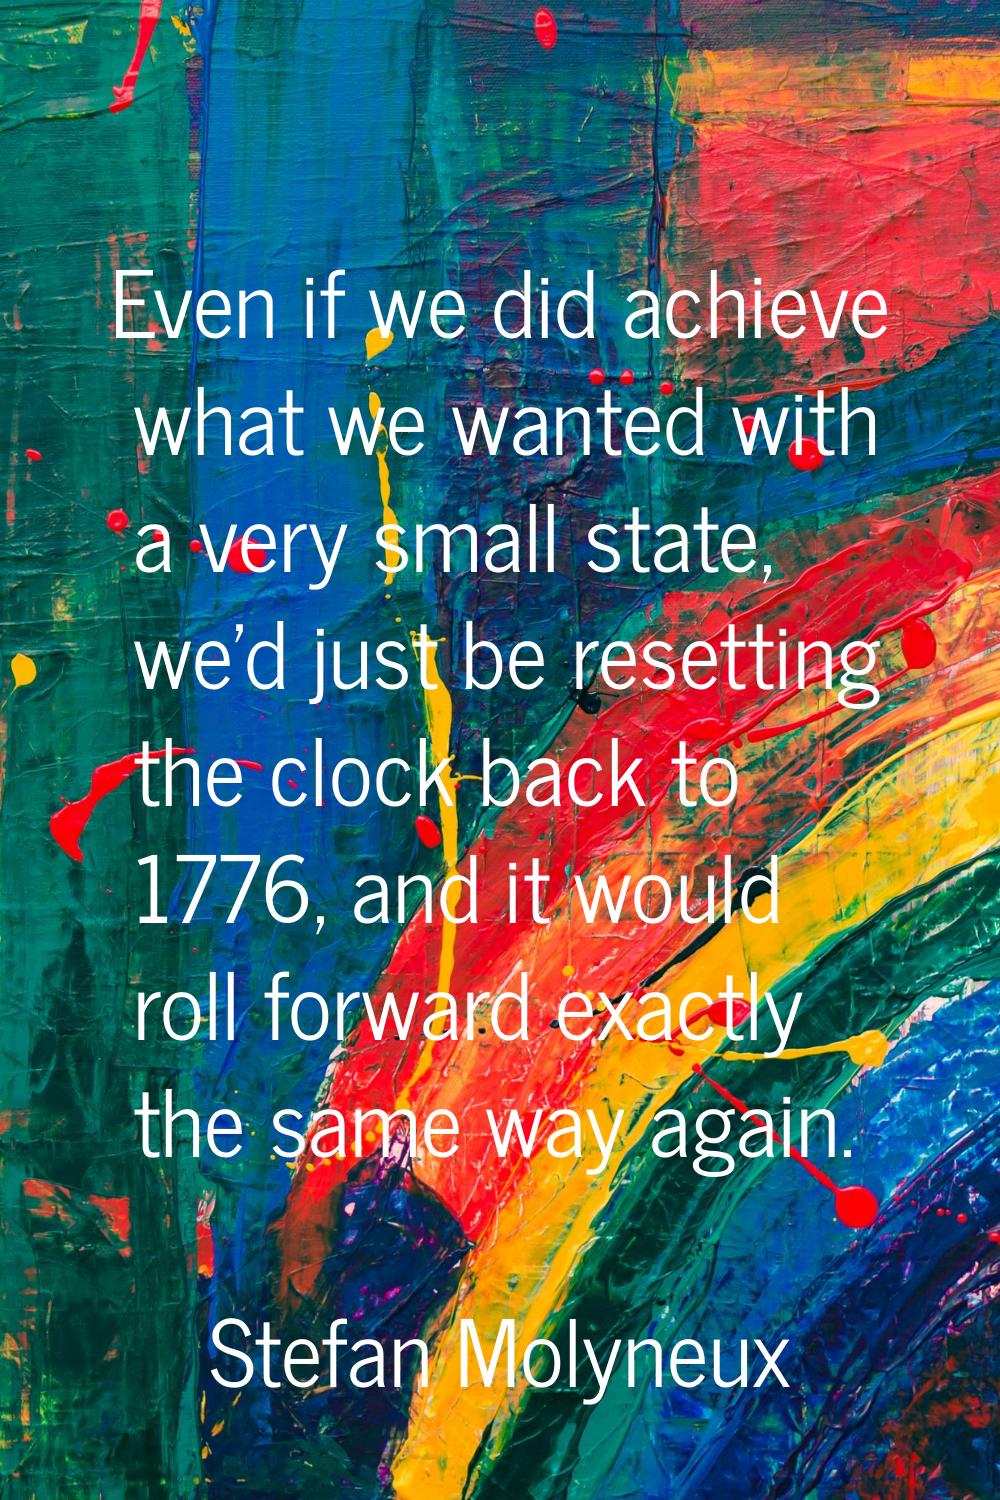 Even if we did achieve what we wanted with a very small state, we'd just be resetting the clock bac